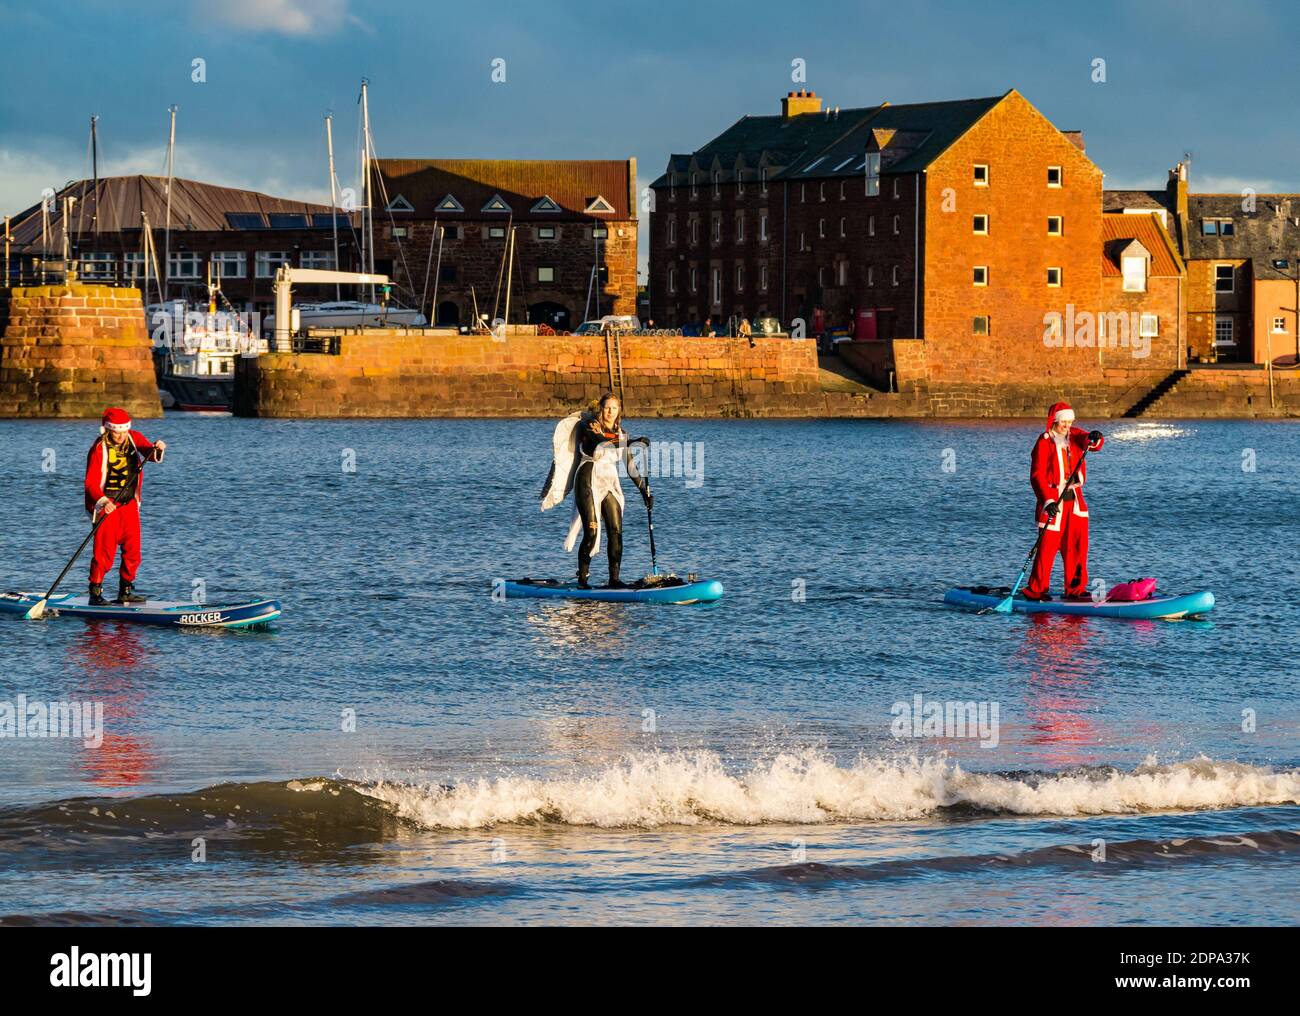 North Berwick, East Lothian, Scotland, United Kingdom, 19th December 2020. Paddle Boarding Santas for charity: a local community initiative by North Berwick News and Views called 'Christmas Cheer' raises over £5,000 funds for families in need. The paddle boarders are dressed in Santa costumes and an angel costume Stock Photo